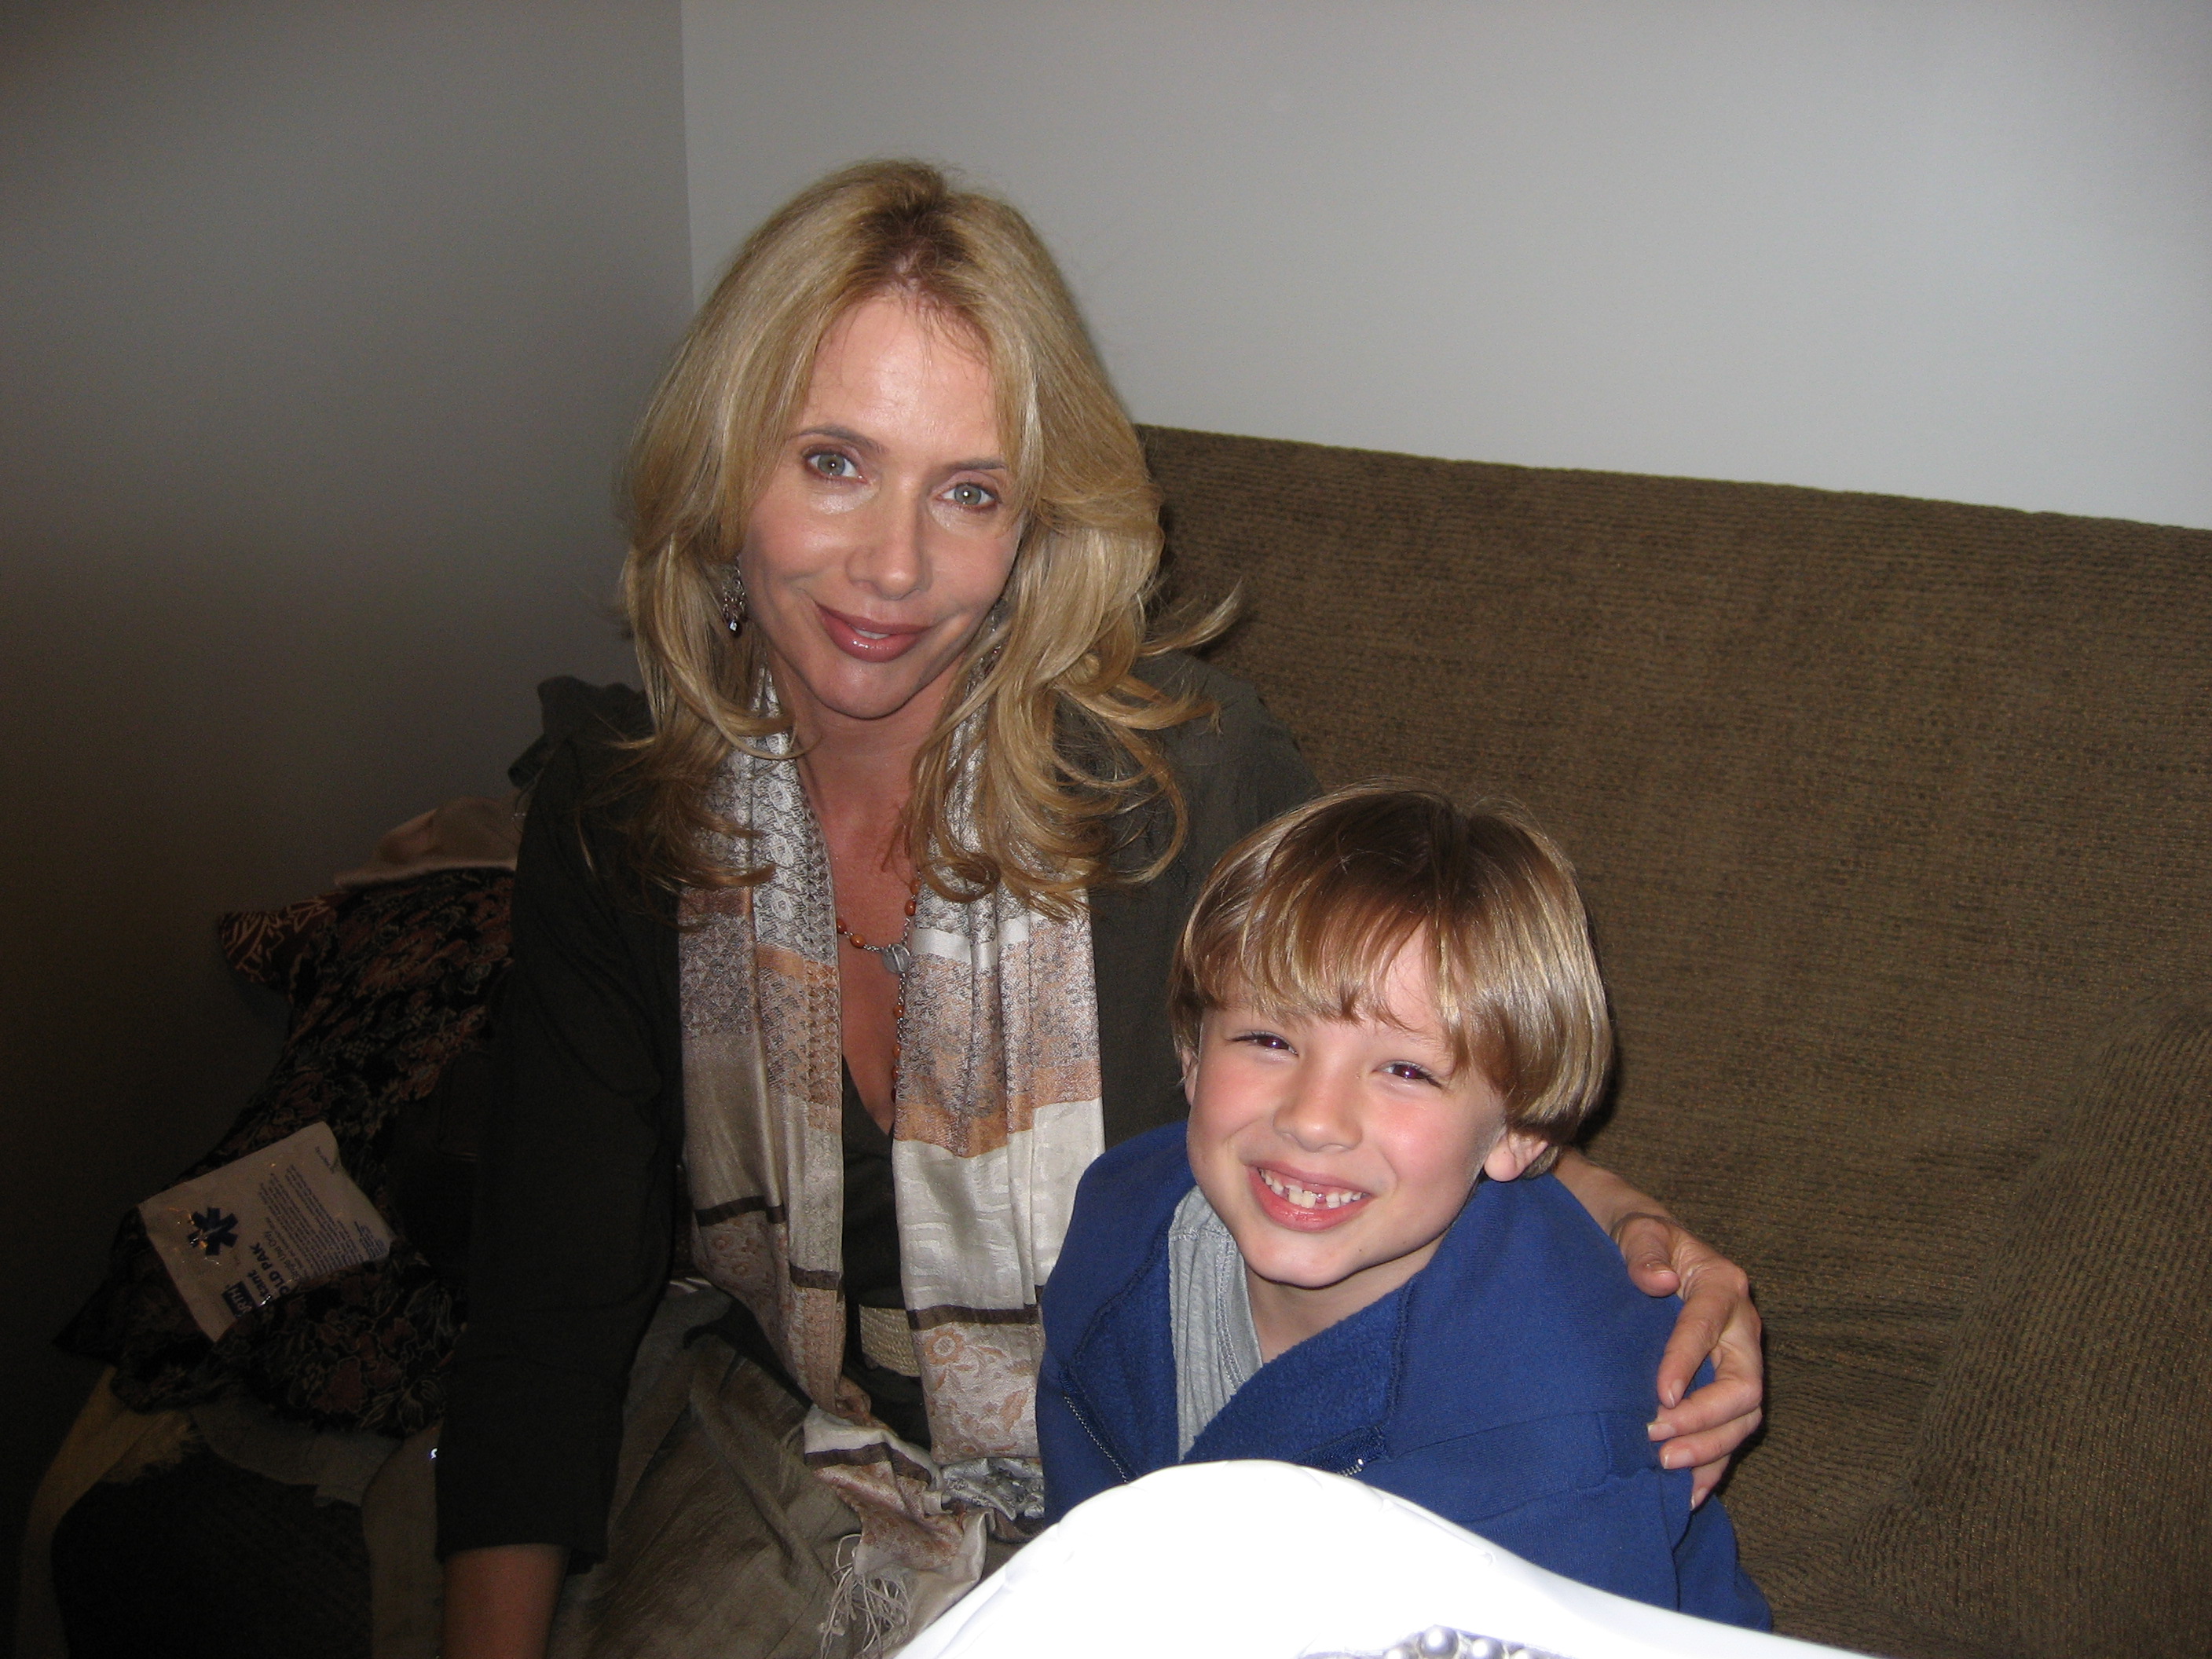 Max with Miss Rosanna Arquette, taken during BALL DON'T LIE shoot